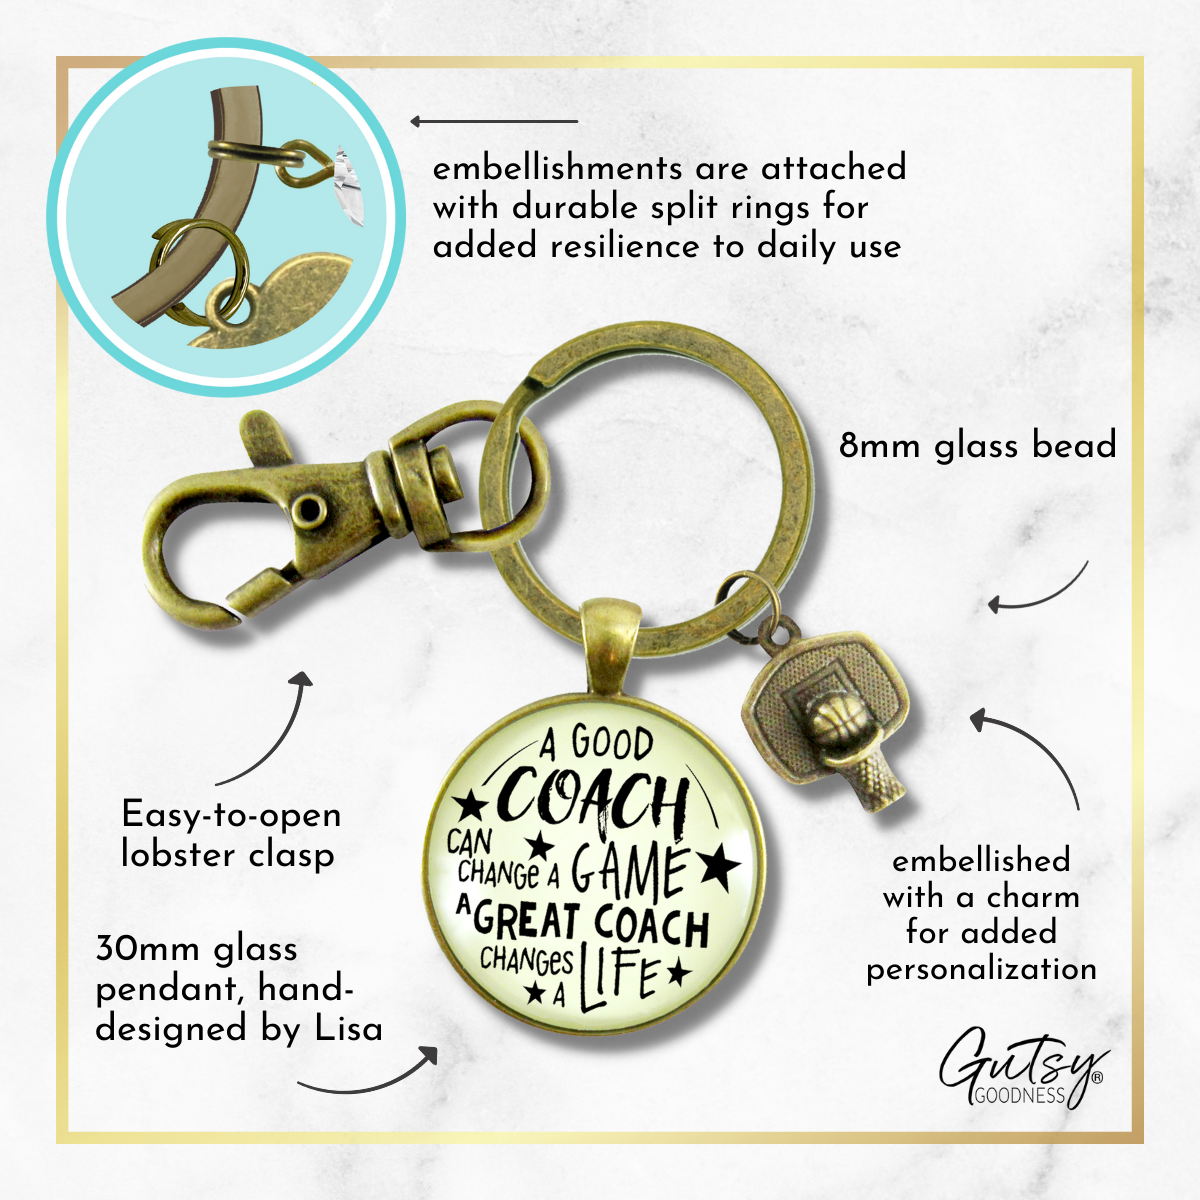 Basketball Coaching Sport Keychain Great Coach Changes Life Thank You Gift - Gutsy Goodness Handmade Jewelry;Basketball Coaching Sport Keychain Great Coach Changes Life Thank You Gift - Gutsy Goodness Handmade Jewelry Gifts